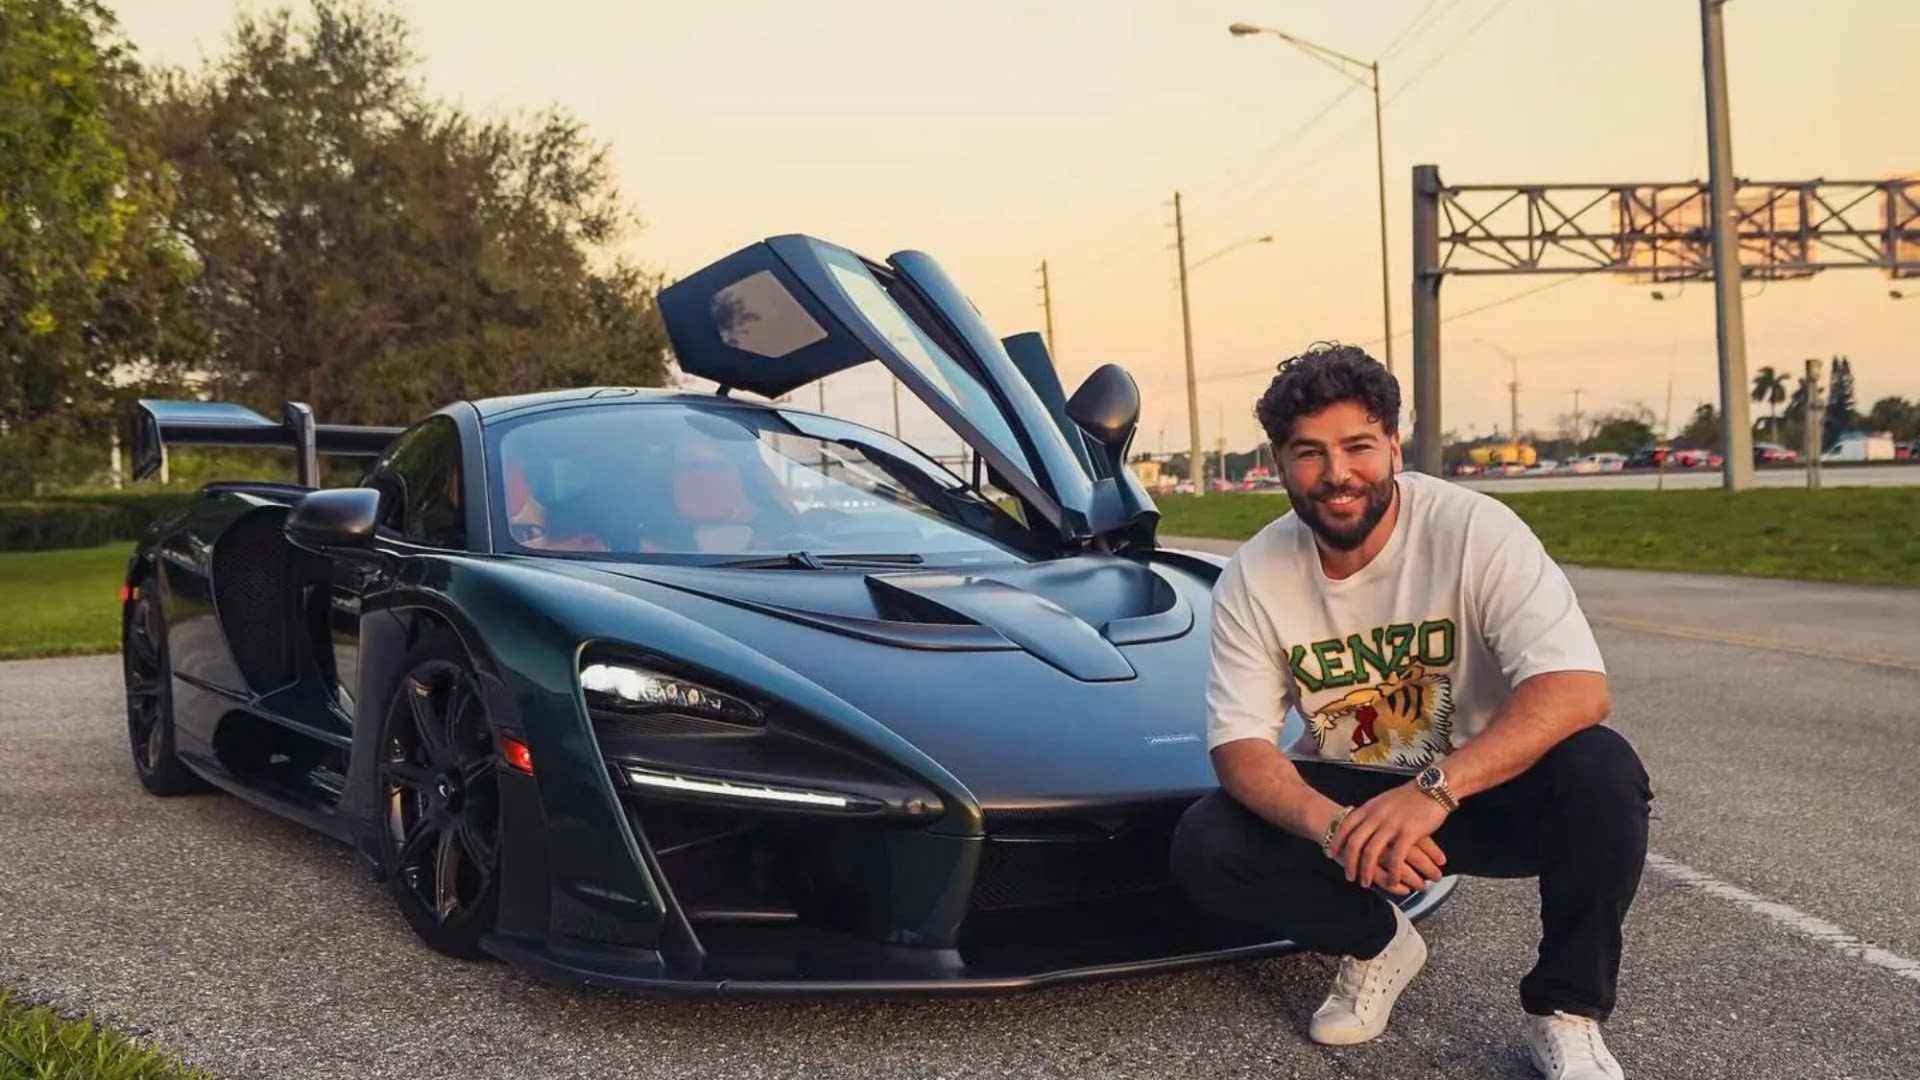 Watch moment idiotic YouTuber crashes £1.3million McLaren while showing off